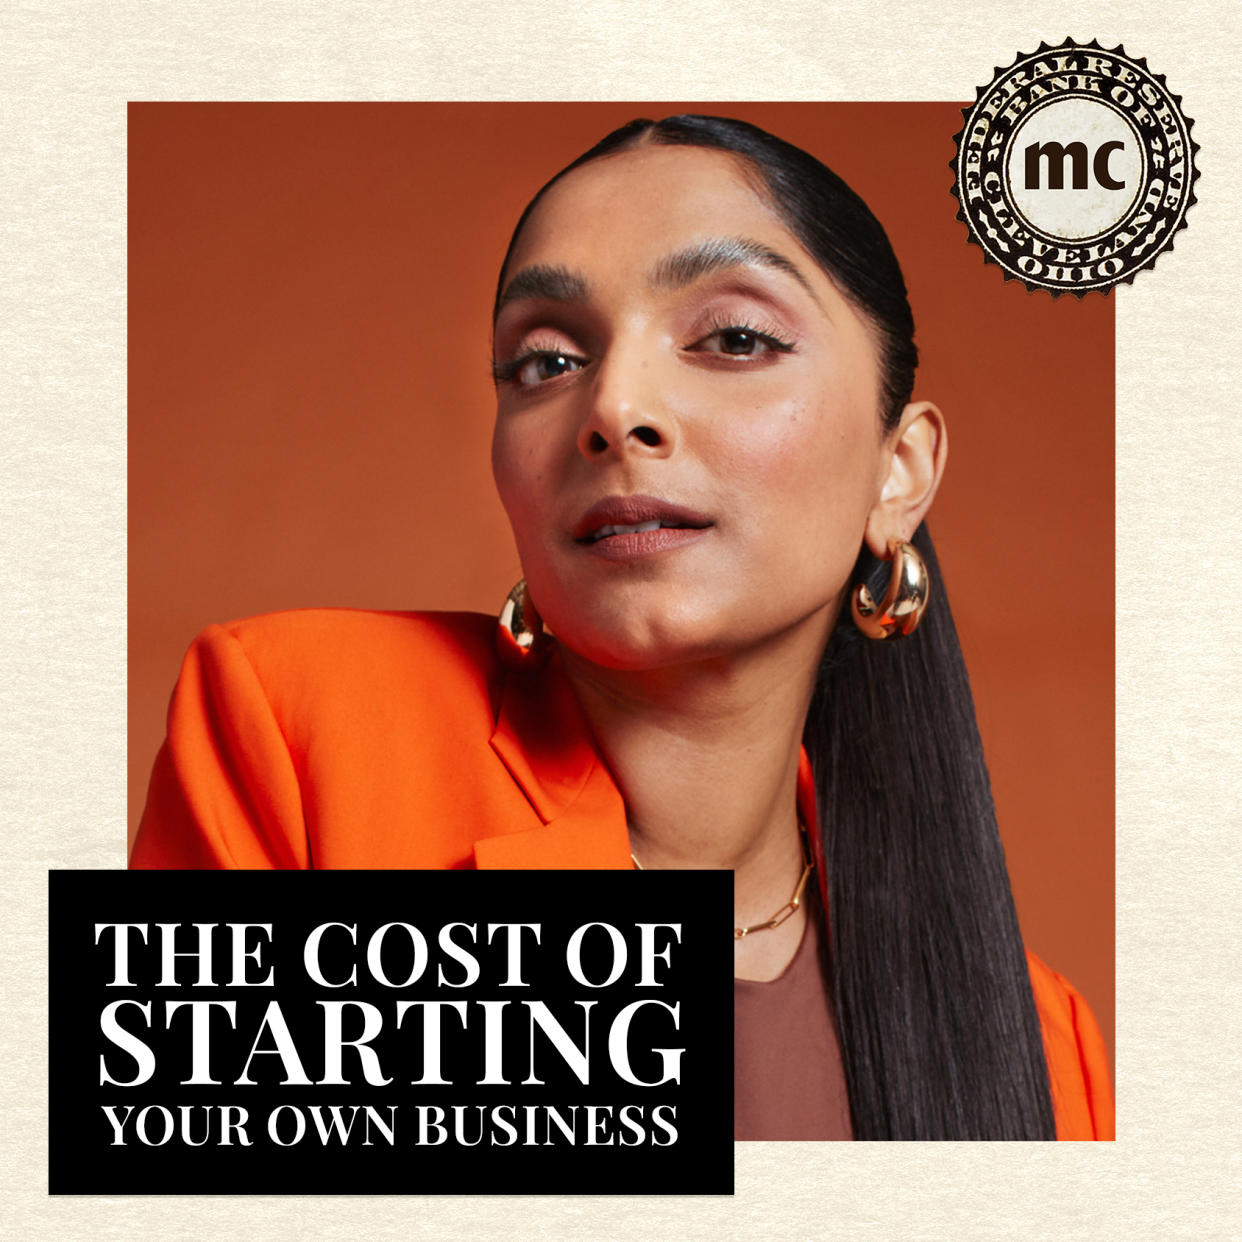  Deepica Mutyala and text "The Cost of Starting Your Own Business". 